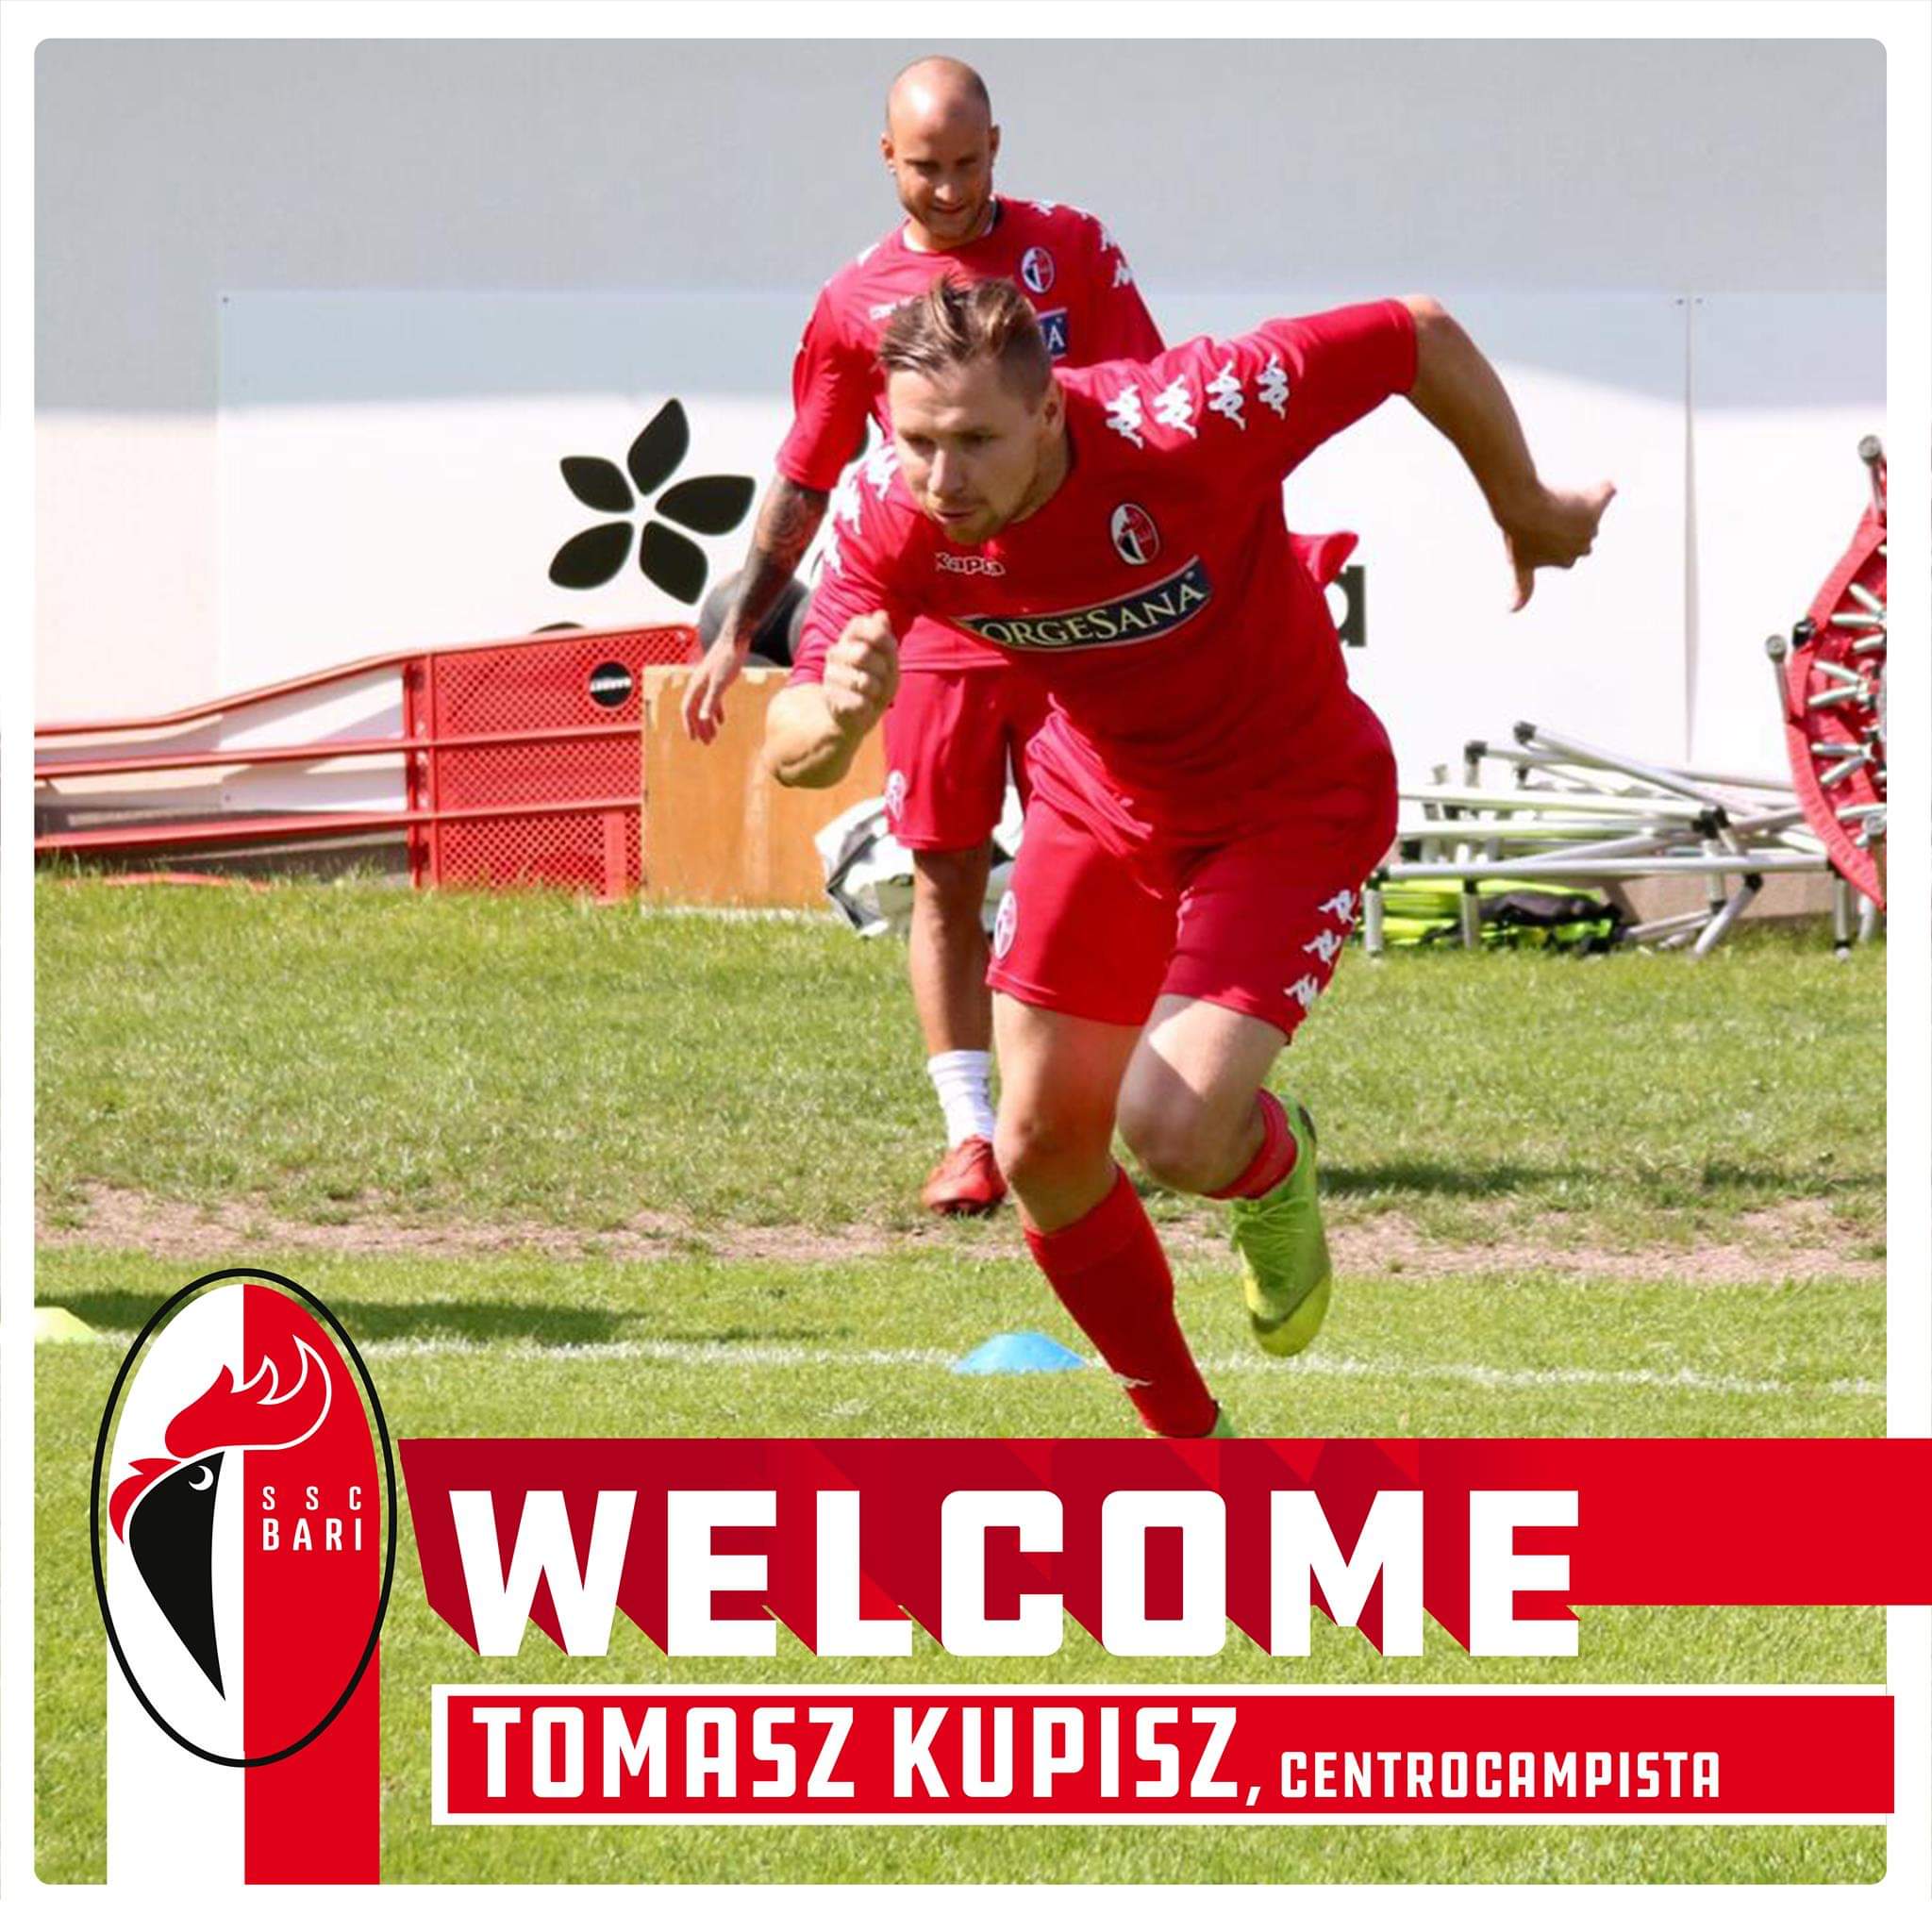 Ssc Bari Calcio Fan On Twitter Central Midfielder Tomas Kupisz Joins On A 3 Year Deal Welcome